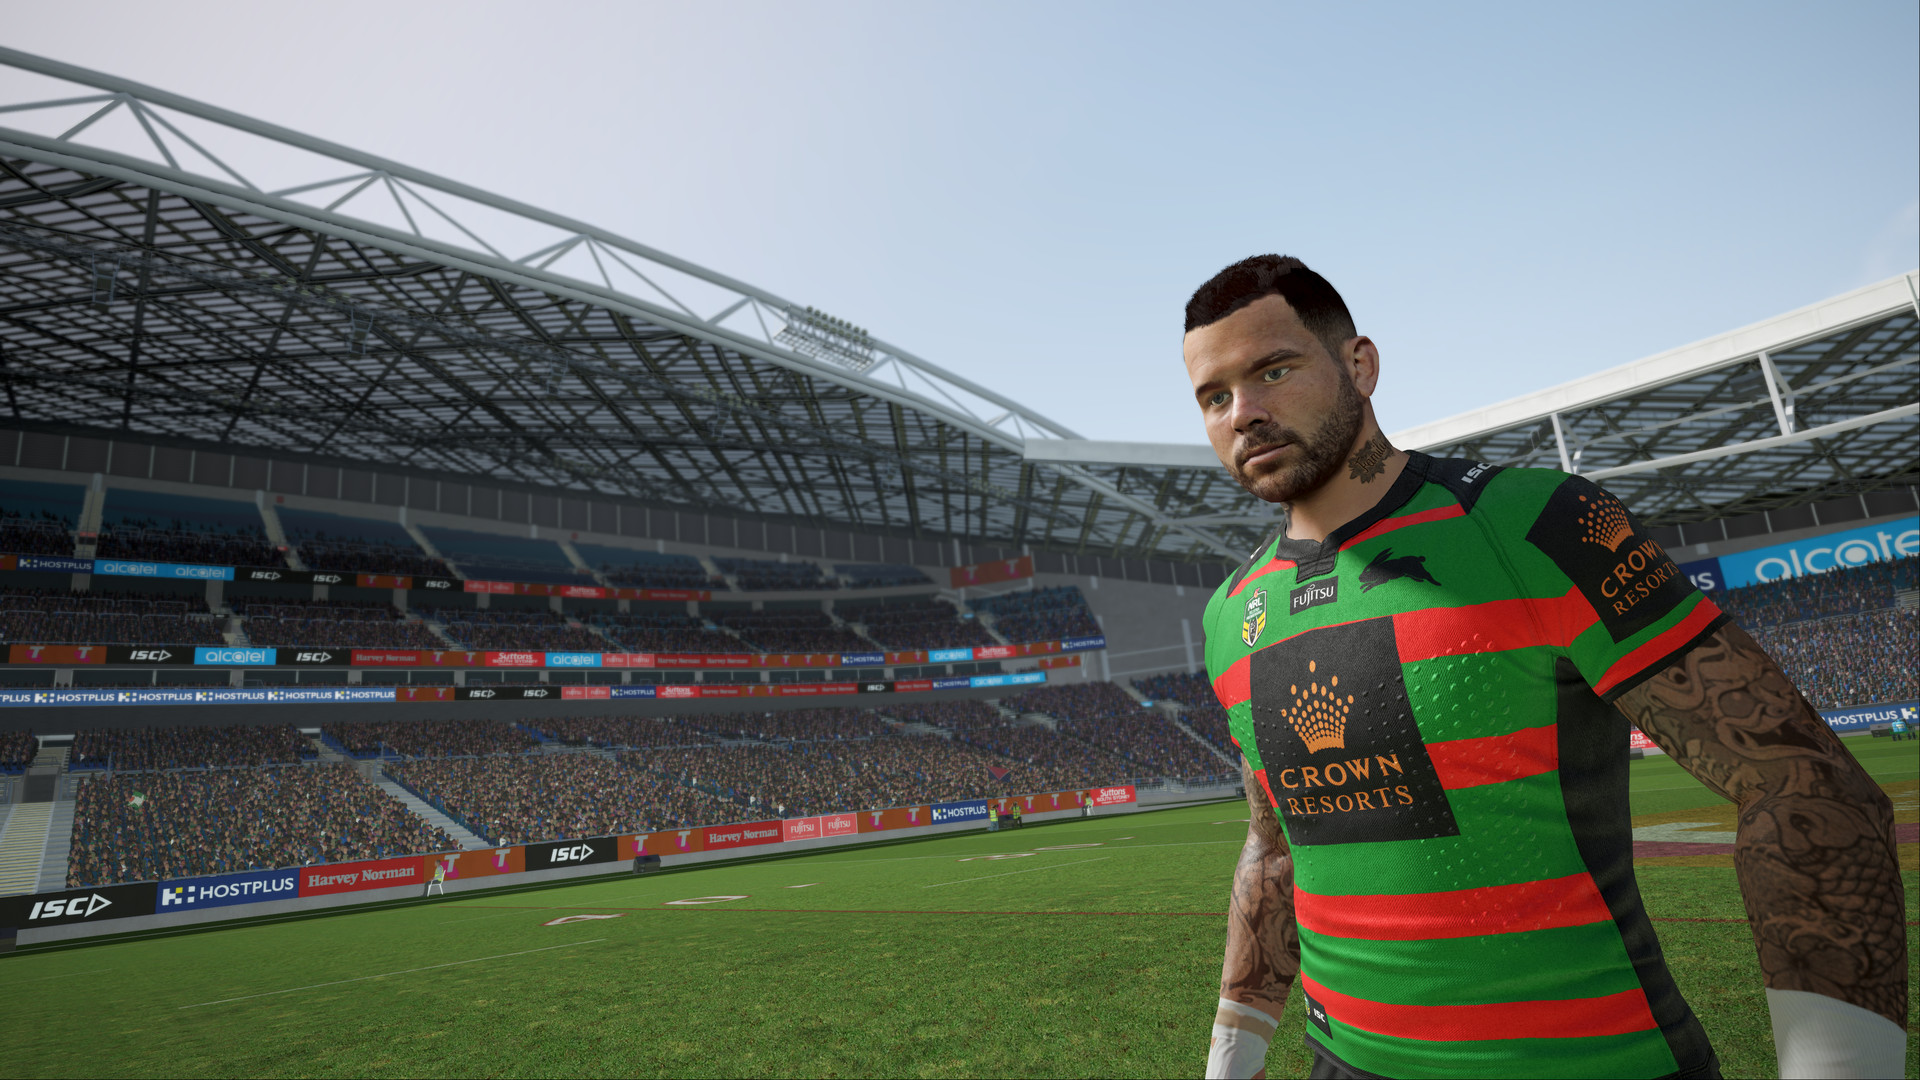 rugby league live 4 2022 teams